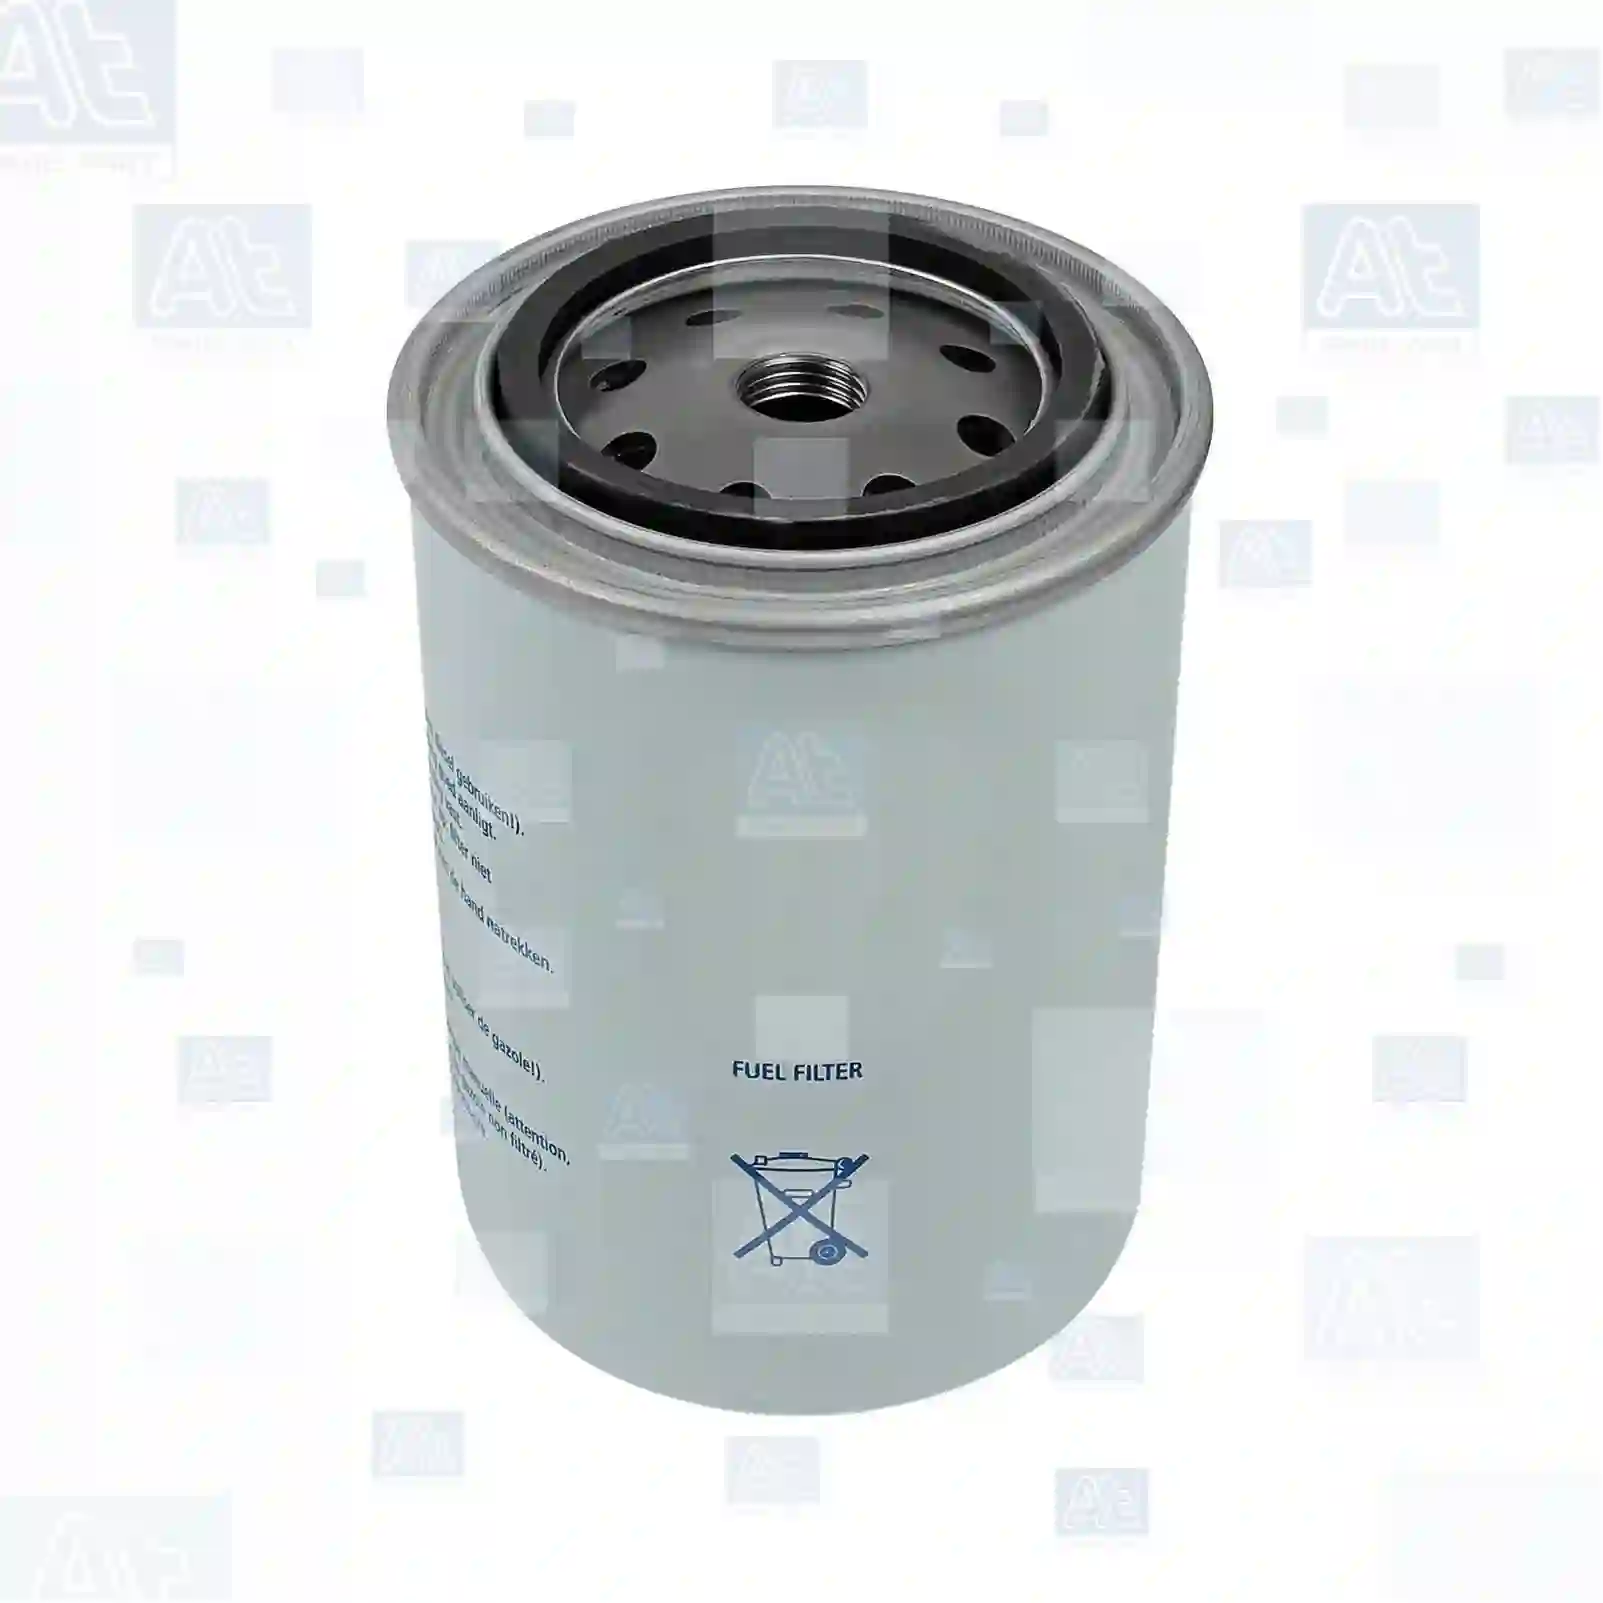 Fuel filter, 77723484, B1050595, 928301, 0001780340, 0247139, 131869, 1318695, 243000, 247139, BRU6932, 00247139, 01161003, 01164520, 01164620, 01174422, 01183359, 01902133, 8121918029300, 0746920, 1470827, 4134475, 00247139, 00363031, 01161003, 01164620, 01174422, Y03732006, 5011267, 5011490, 01164620, 01902133, 503139140, 40001351, 01161003, 01164620, 01174422, 8121918029300, 550228577, 5601514, 0000928301, 605411880004, 60541188004, 1050595, B1050595, 5010359706, 6005019574, 928324, SN324, 0170149000, 170149000, 21777451, 11711074, ZG10130-0008 ||  77723484 At Spare Part | Engine, Accelerator Pedal, Camshaft, Connecting Rod, Crankcase, Crankshaft, Cylinder Head, Engine Suspension Mountings, Exhaust Manifold, Exhaust Gas Recirculation, Filter Kits, Flywheel Housing, General Overhaul Kits, Engine, Intake Manifold, Oil Cleaner, Oil Cooler, Oil Filter, Oil Pump, Oil Sump, Piston & Liner, Sensor & Switch, Timing Case, Turbocharger, Cooling System, Belt Tensioner, Coolant Filter, Coolant Pipe, Corrosion Prevention Agent, Drive, Expansion Tank, Fan, Intercooler, Monitors & Gauges, Radiator, Thermostat, V-Belt / Timing belt, Water Pump, Fuel System, Electronical Injector Unit, Feed Pump, Fuel Filter, cpl., Fuel Gauge Sender,  Fuel Line, Fuel Pump, Fuel Tank, Injection Line Kit, Injection Pump, Exhaust System, Clutch & Pedal, Gearbox, Propeller Shaft, Axles, Brake System, Hubs & Wheels, Suspension, Leaf Spring, Universal Parts / Accessories, Steering, Electrical System, Cabin Fuel filter, 77723484, B1050595, 928301, 0001780340, 0247139, 131869, 1318695, 243000, 247139, BRU6932, 00247139, 01161003, 01164520, 01164620, 01174422, 01183359, 01902133, 8121918029300, 0746920, 1470827, 4134475, 00247139, 00363031, 01161003, 01164620, 01174422, Y03732006, 5011267, 5011490, 01164620, 01902133, 503139140, 40001351, 01161003, 01164620, 01174422, 8121918029300, 550228577, 5601514, 0000928301, 605411880004, 60541188004, 1050595, B1050595, 5010359706, 6005019574, 928324, SN324, 0170149000, 170149000, 21777451, 11711074, ZG10130-0008 ||  77723484 At Spare Part | Engine, Accelerator Pedal, Camshaft, Connecting Rod, Crankcase, Crankshaft, Cylinder Head, Engine Suspension Mountings, Exhaust Manifold, Exhaust Gas Recirculation, Filter Kits, Flywheel Housing, General Overhaul Kits, Engine, Intake Manifold, Oil Cleaner, Oil Cooler, Oil Filter, Oil Pump, Oil Sump, Piston & Liner, Sensor & Switch, Timing Case, Turbocharger, Cooling System, Belt Tensioner, Coolant Filter, Coolant Pipe, Corrosion Prevention Agent, Drive, Expansion Tank, Fan, Intercooler, Monitors & Gauges, Radiator, Thermostat, V-Belt / Timing belt, Water Pump, Fuel System, Electronical Injector Unit, Feed Pump, Fuel Filter, cpl., Fuel Gauge Sender,  Fuel Line, Fuel Pump, Fuel Tank, Injection Line Kit, Injection Pump, Exhaust System, Clutch & Pedal, Gearbox, Propeller Shaft, Axles, Brake System, Hubs & Wheels, Suspension, Leaf Spring, Universal Parts / Accessories, Steering, Electrical System, Cabin